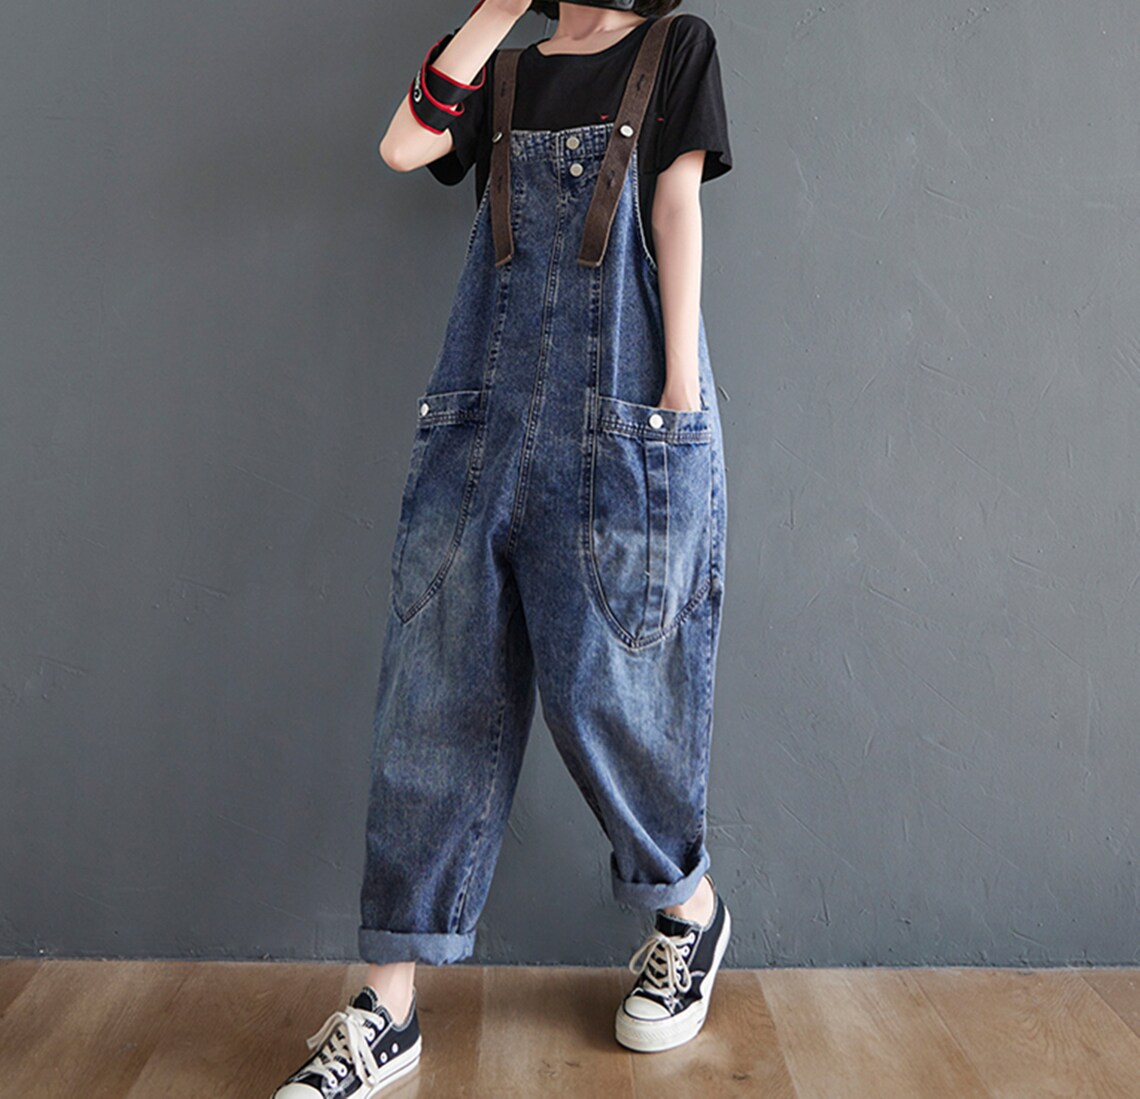 Retro Denim Overalls Baggy Jeans Jumpsuits Wide Leg Overall | Etsy